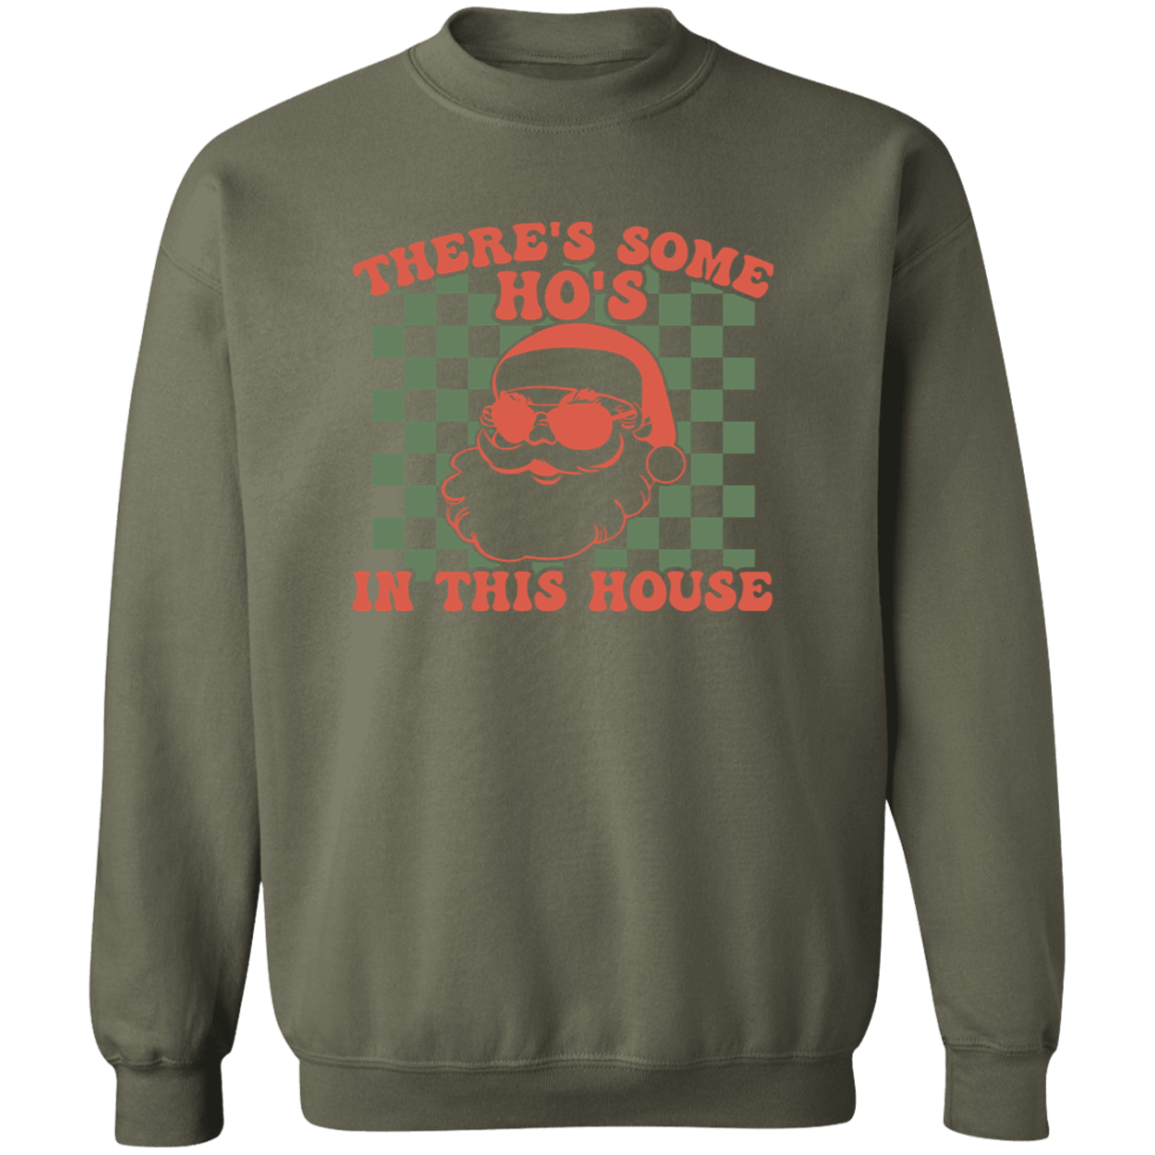 There's Some Ho's In This House Sweatshirt